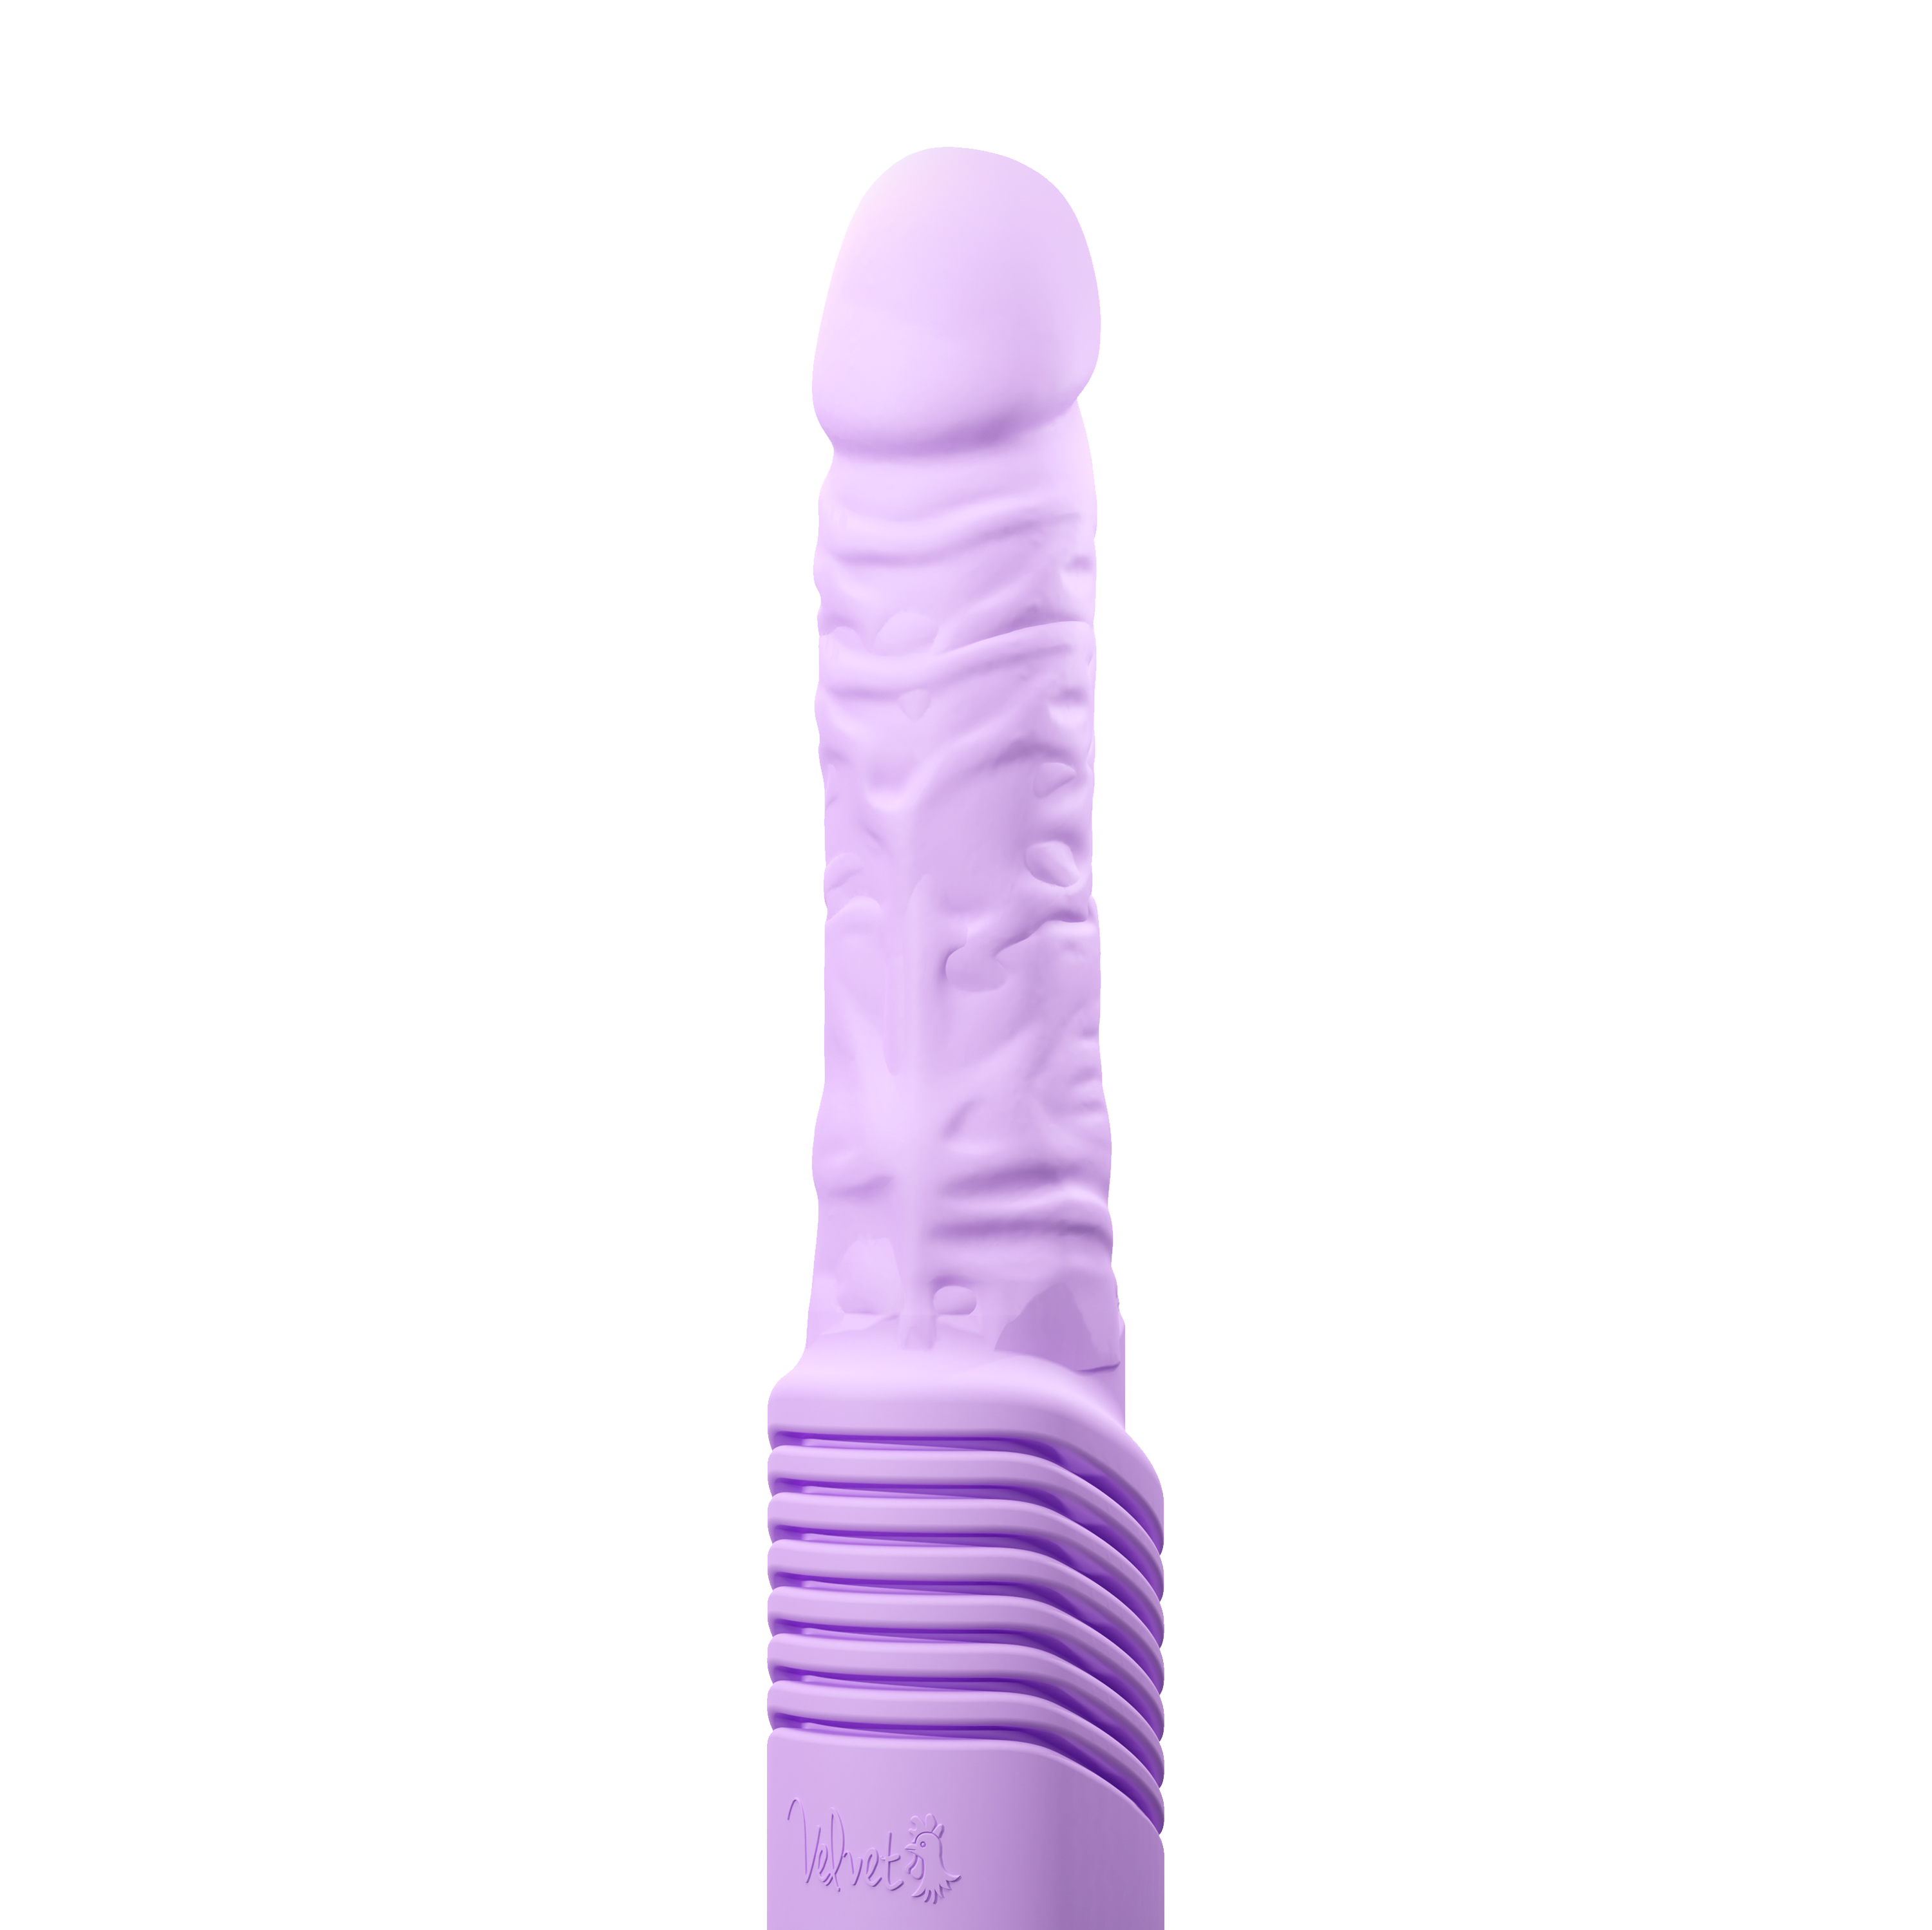 Amazing Sex Toys - 10 Sex Toys for All Genders and How to Use Them